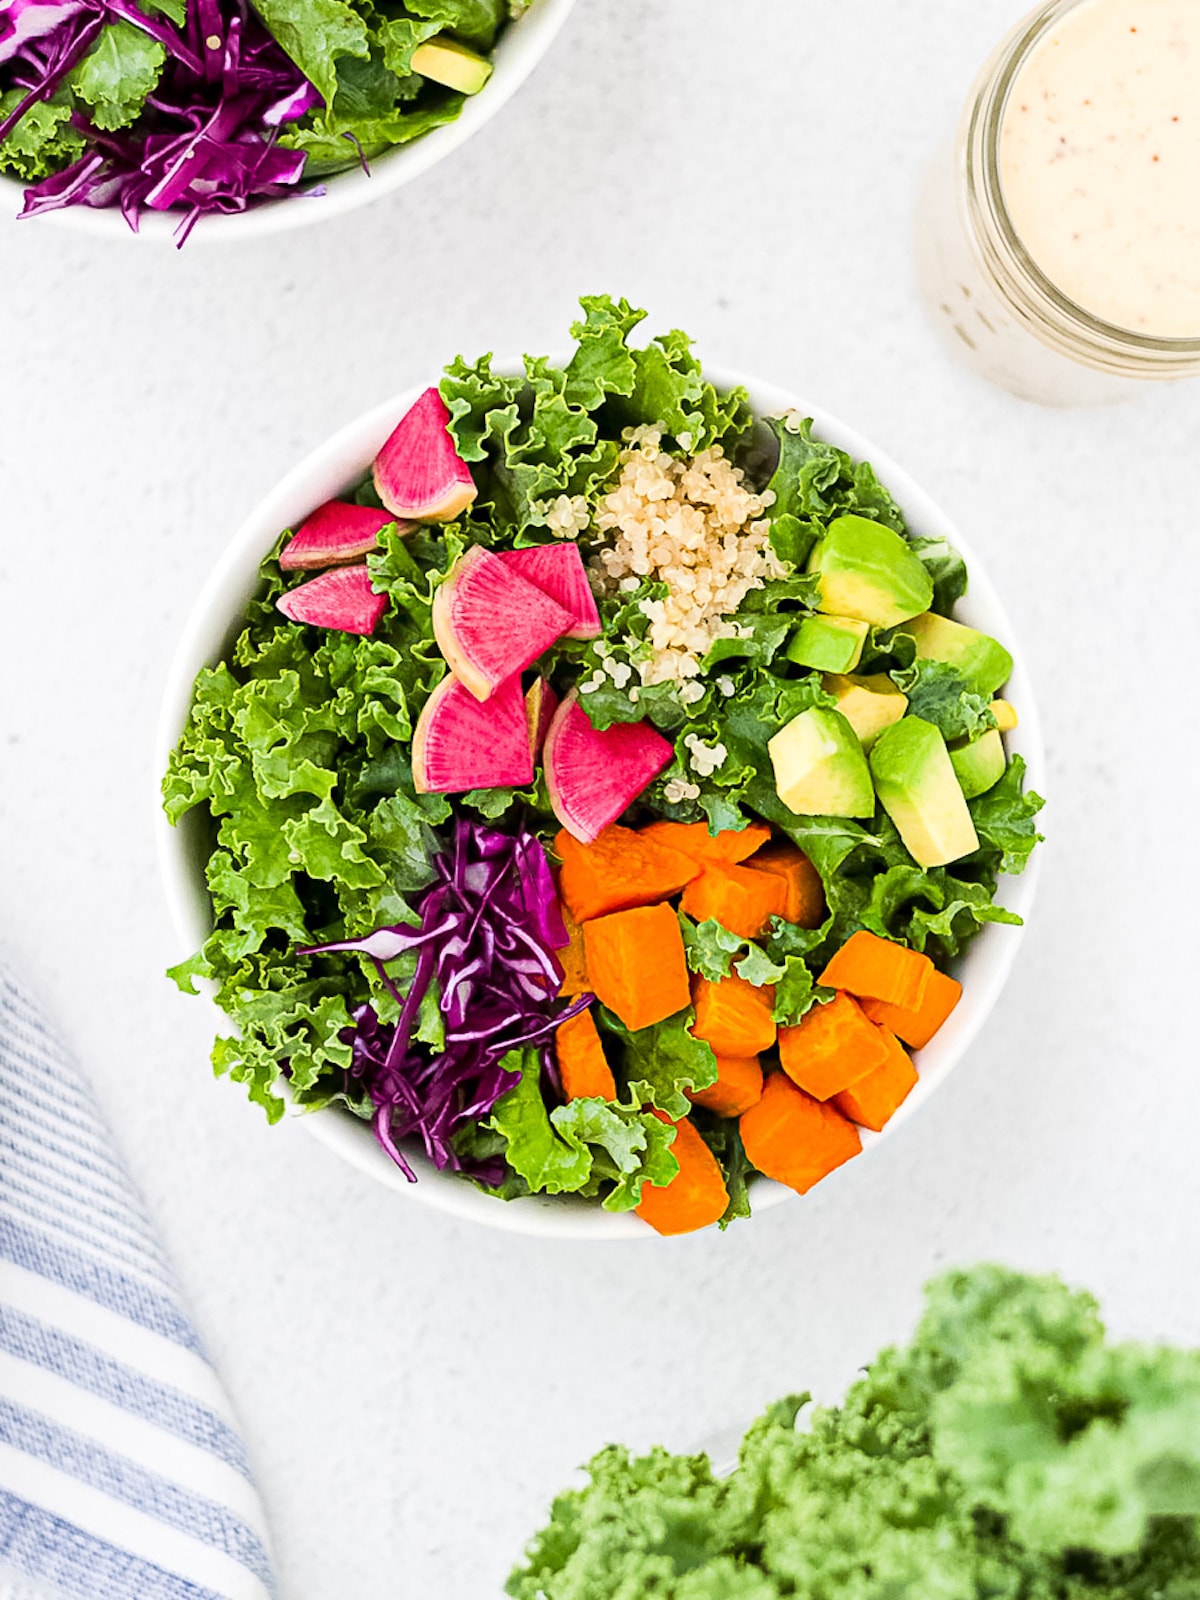 A white bowl filled with prepared kale, pink radishes, sliced avocado, roasted and diced orange sweet potatoes, sliced red cabbage, and cooked quinoa.